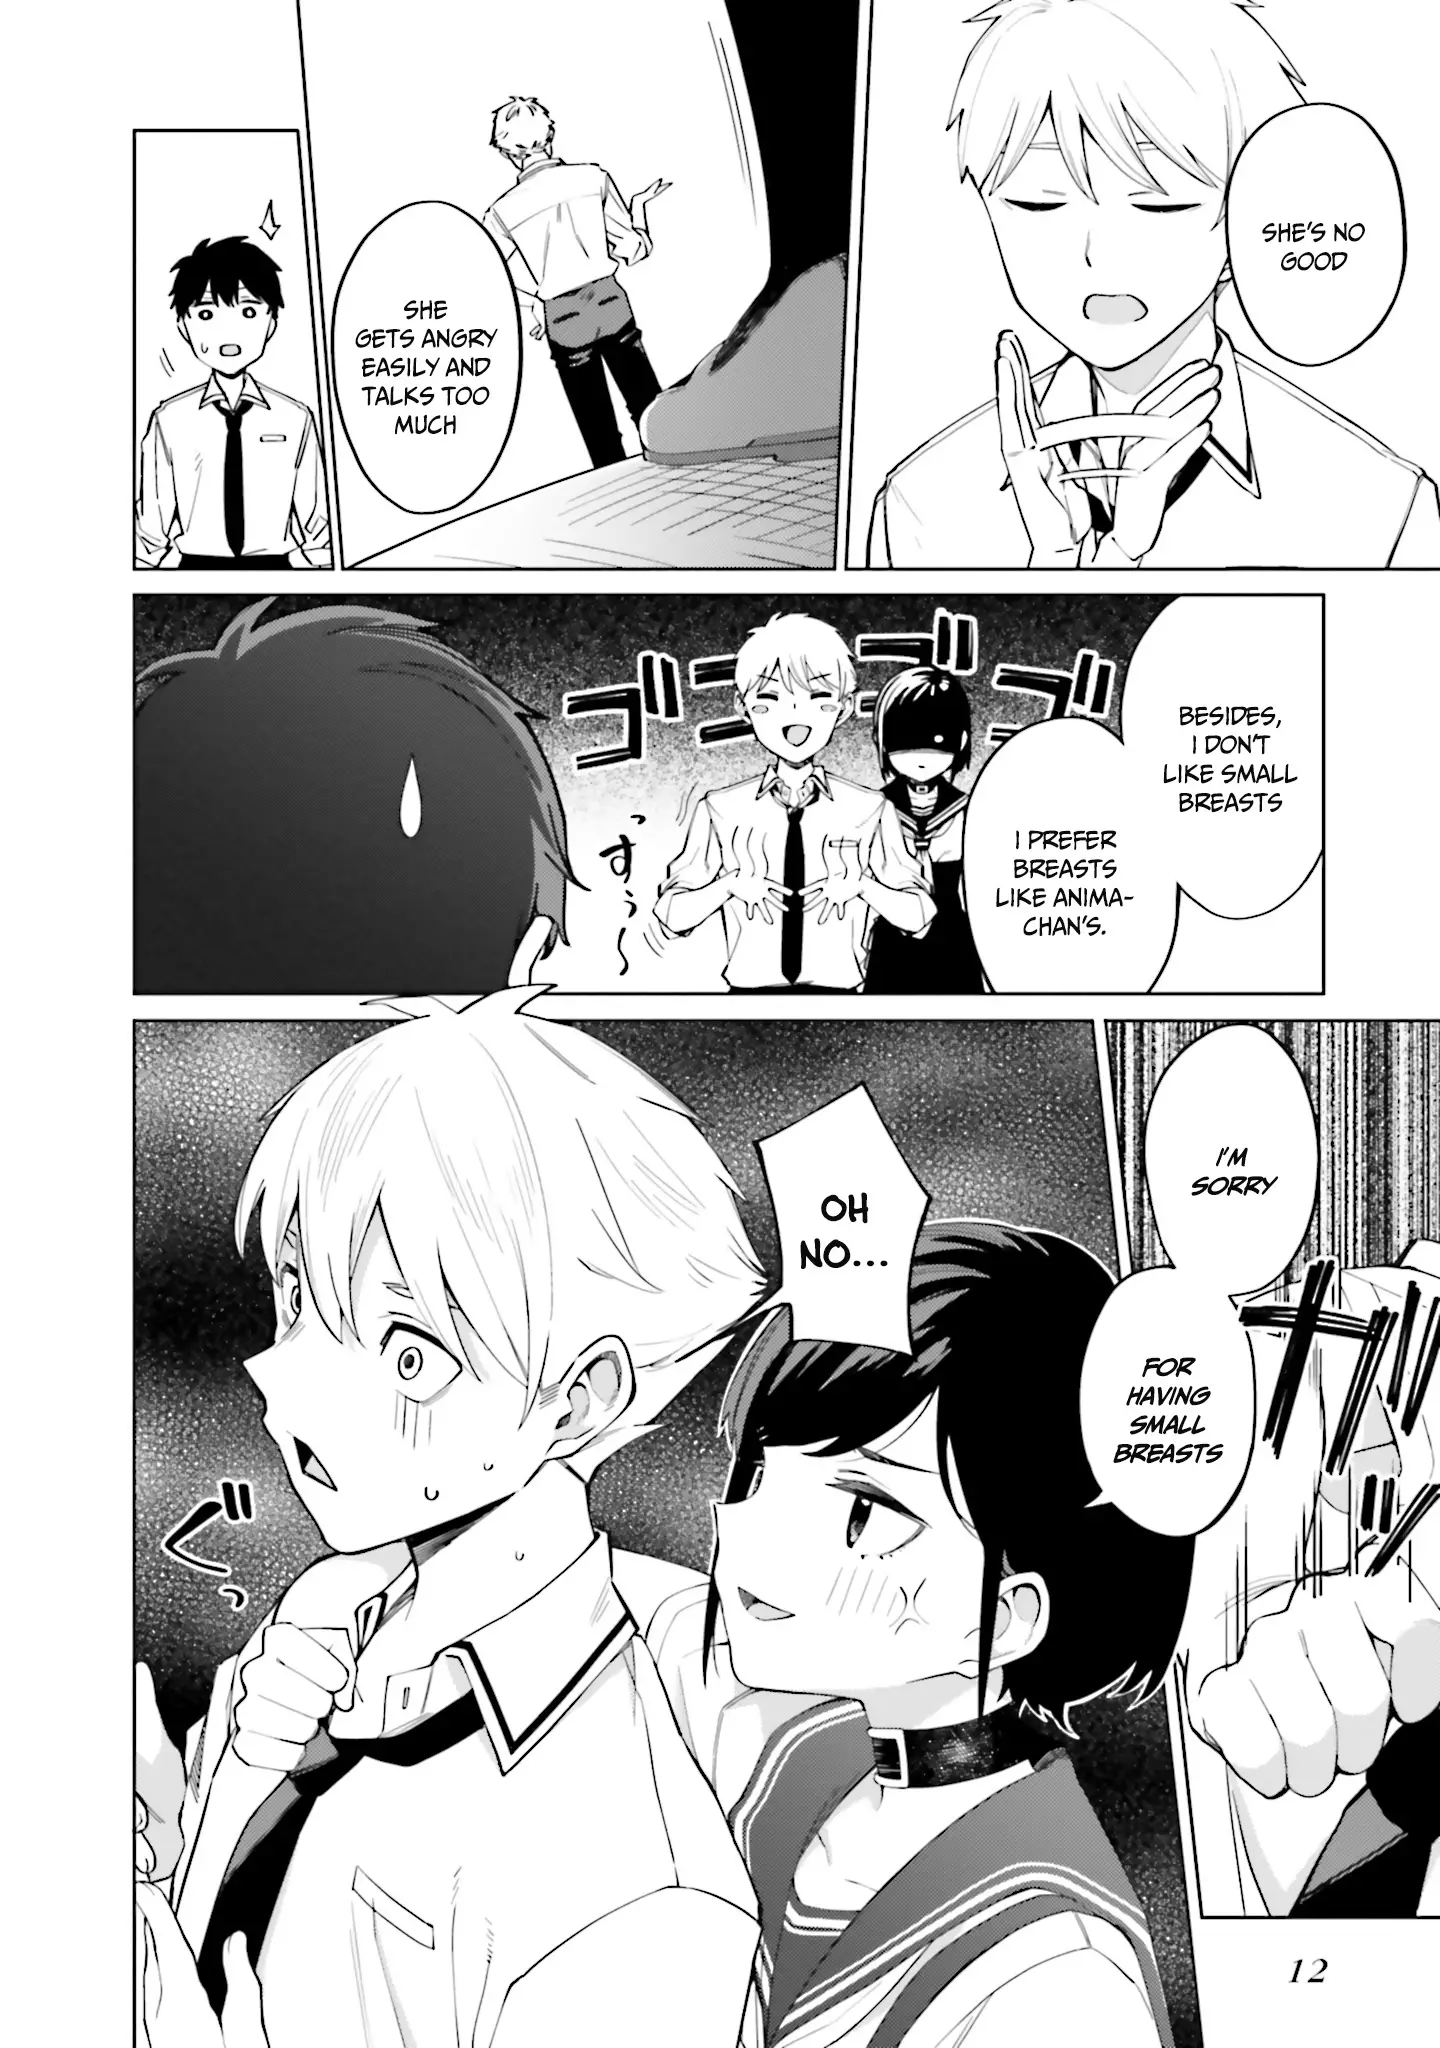 I Don't Understand Shirogane-San's Facial Expression At All - 13 page 13-47c38dd7